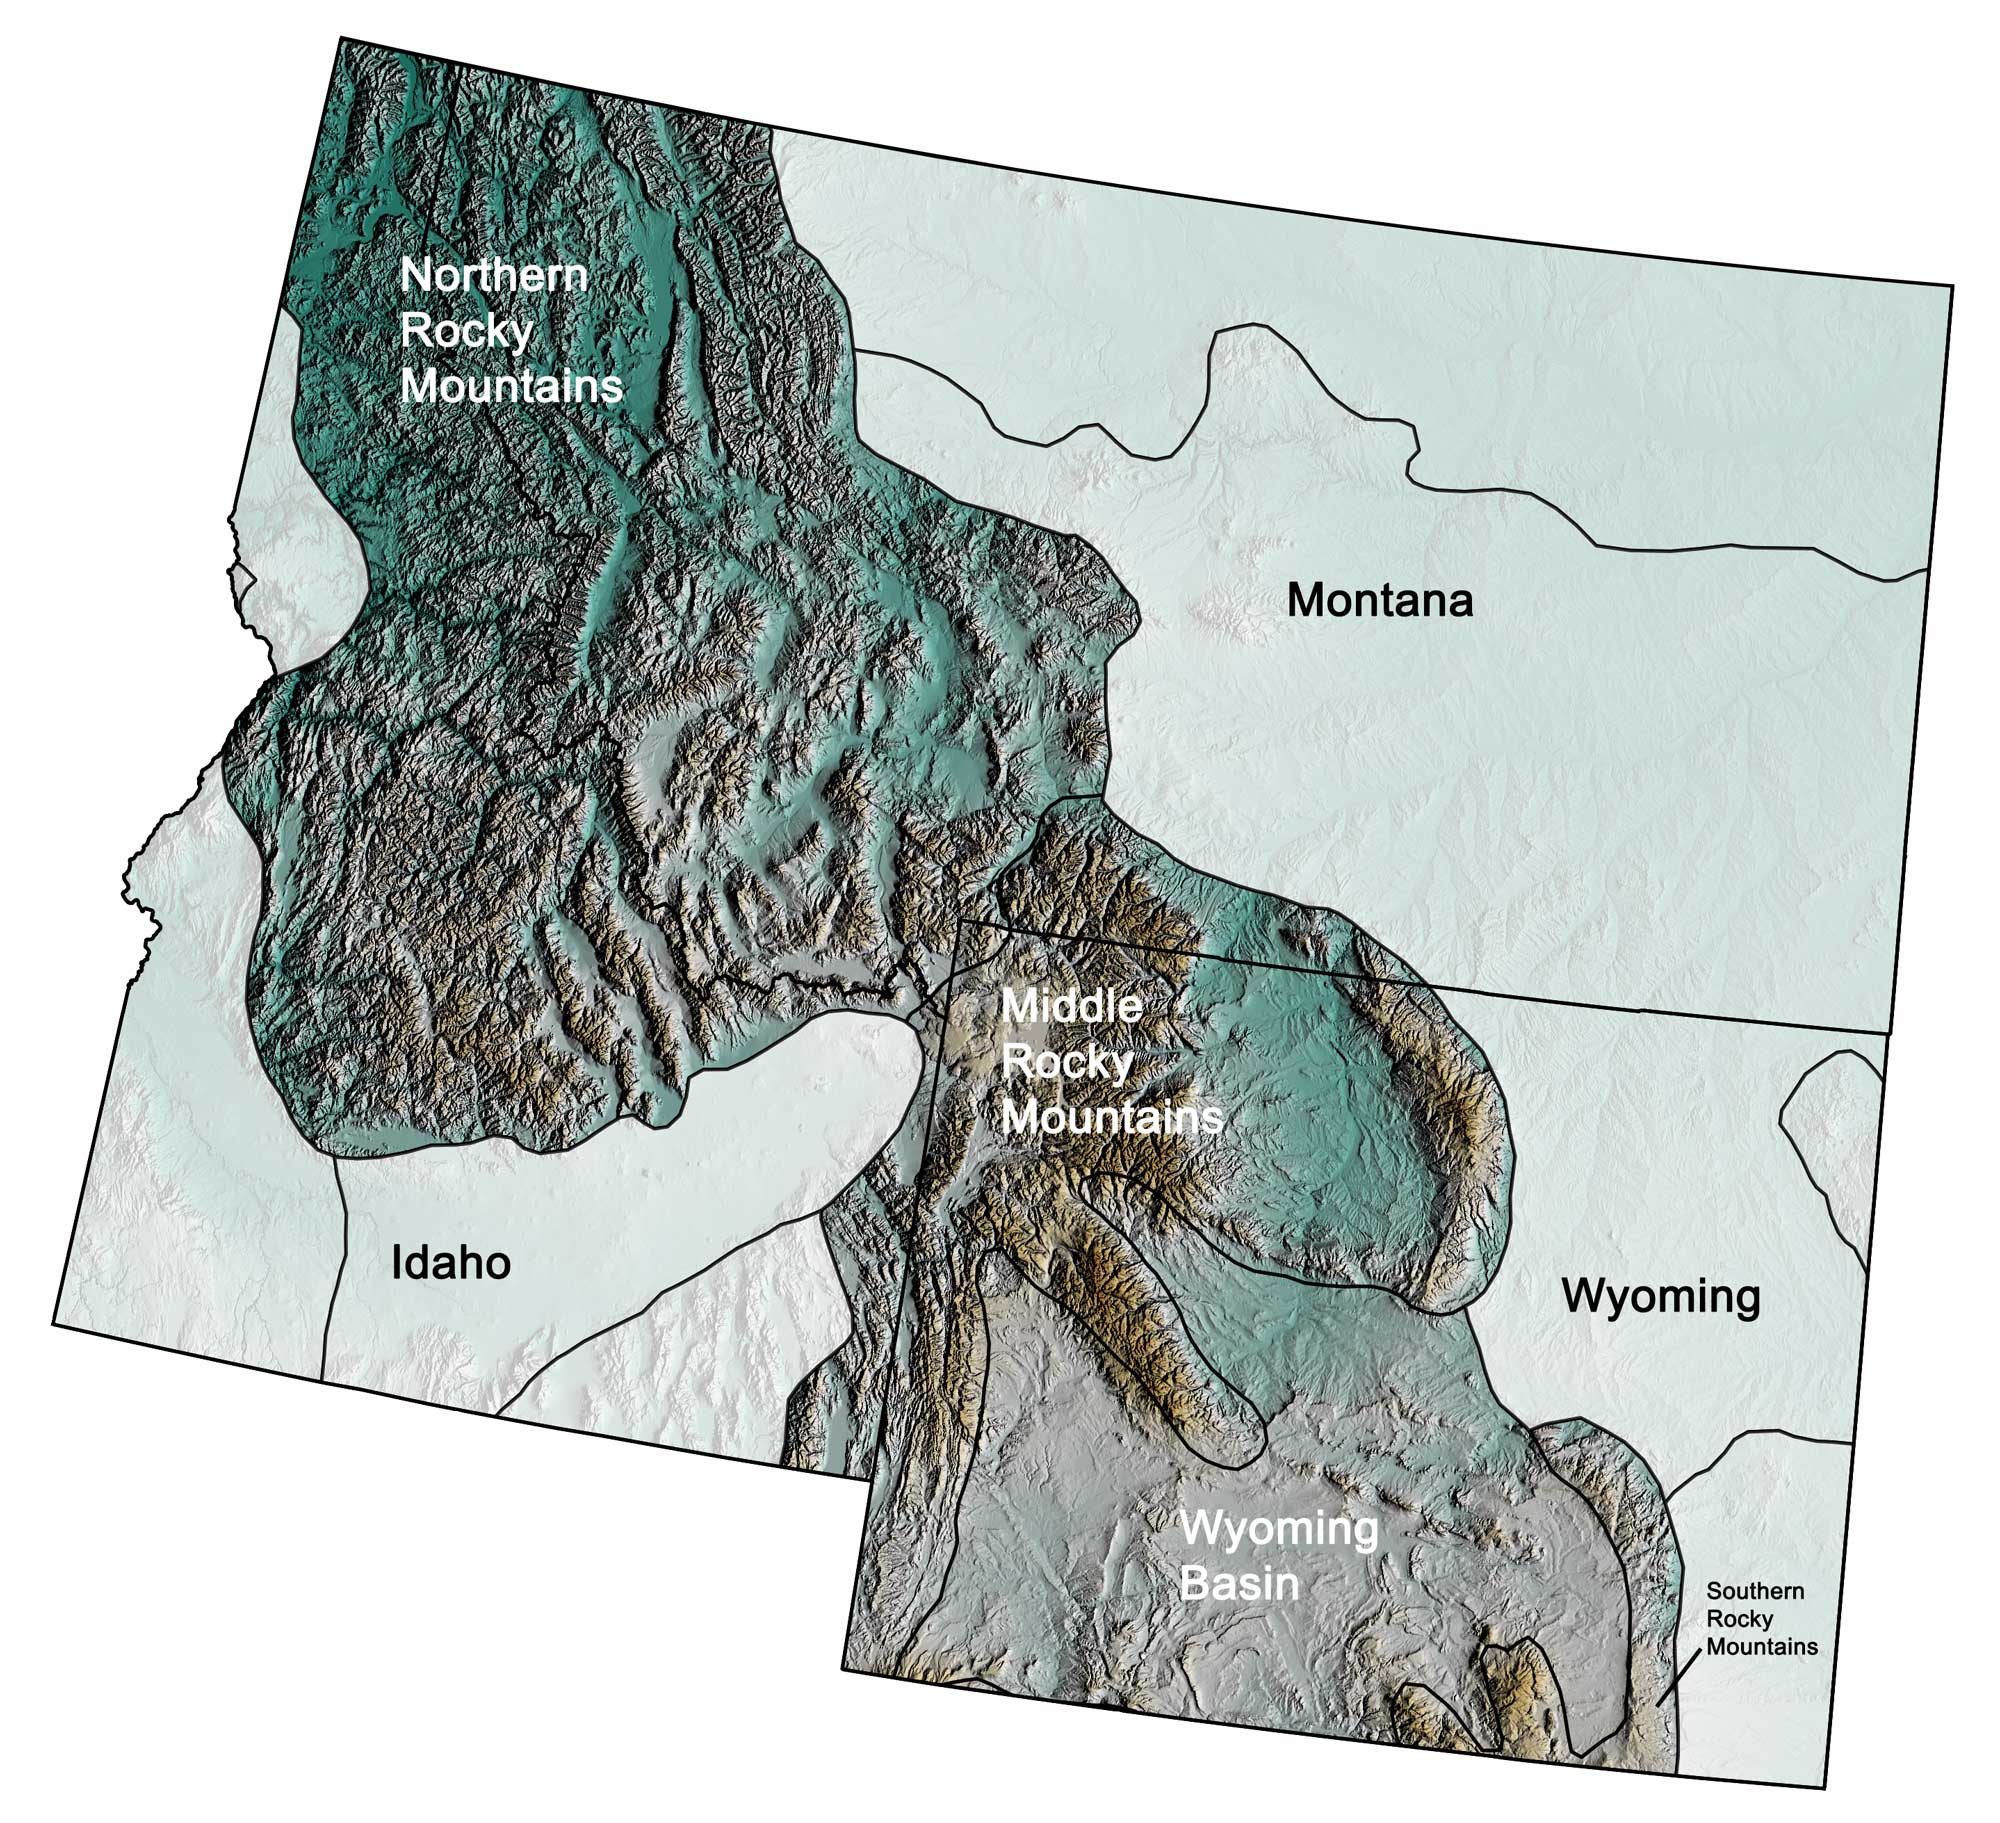 Topographic map of the Rocky Mountains region of the northwest-central United States.